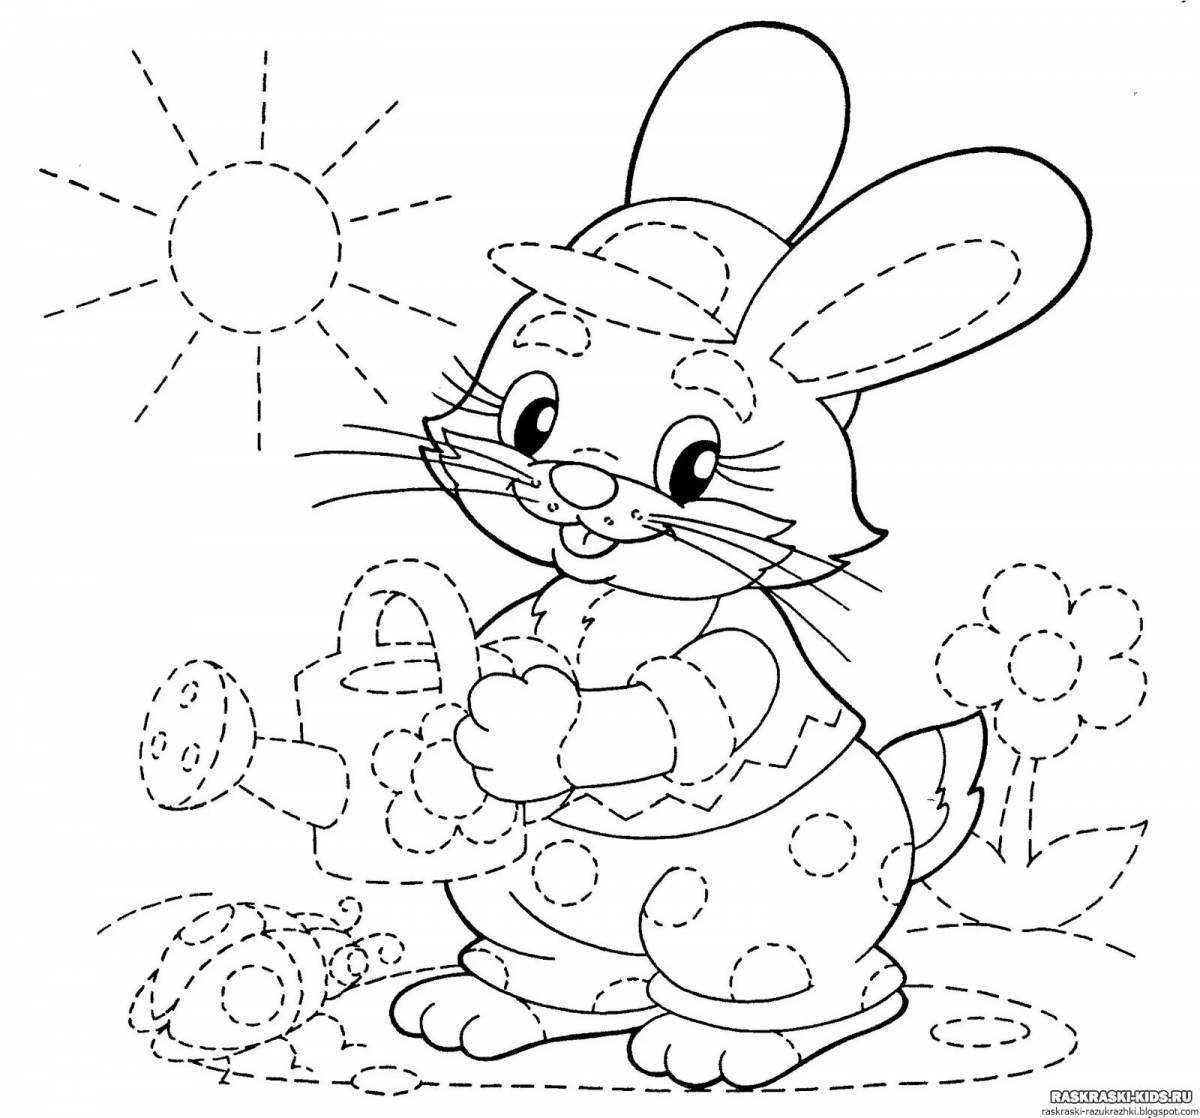 Funny coloring page copy